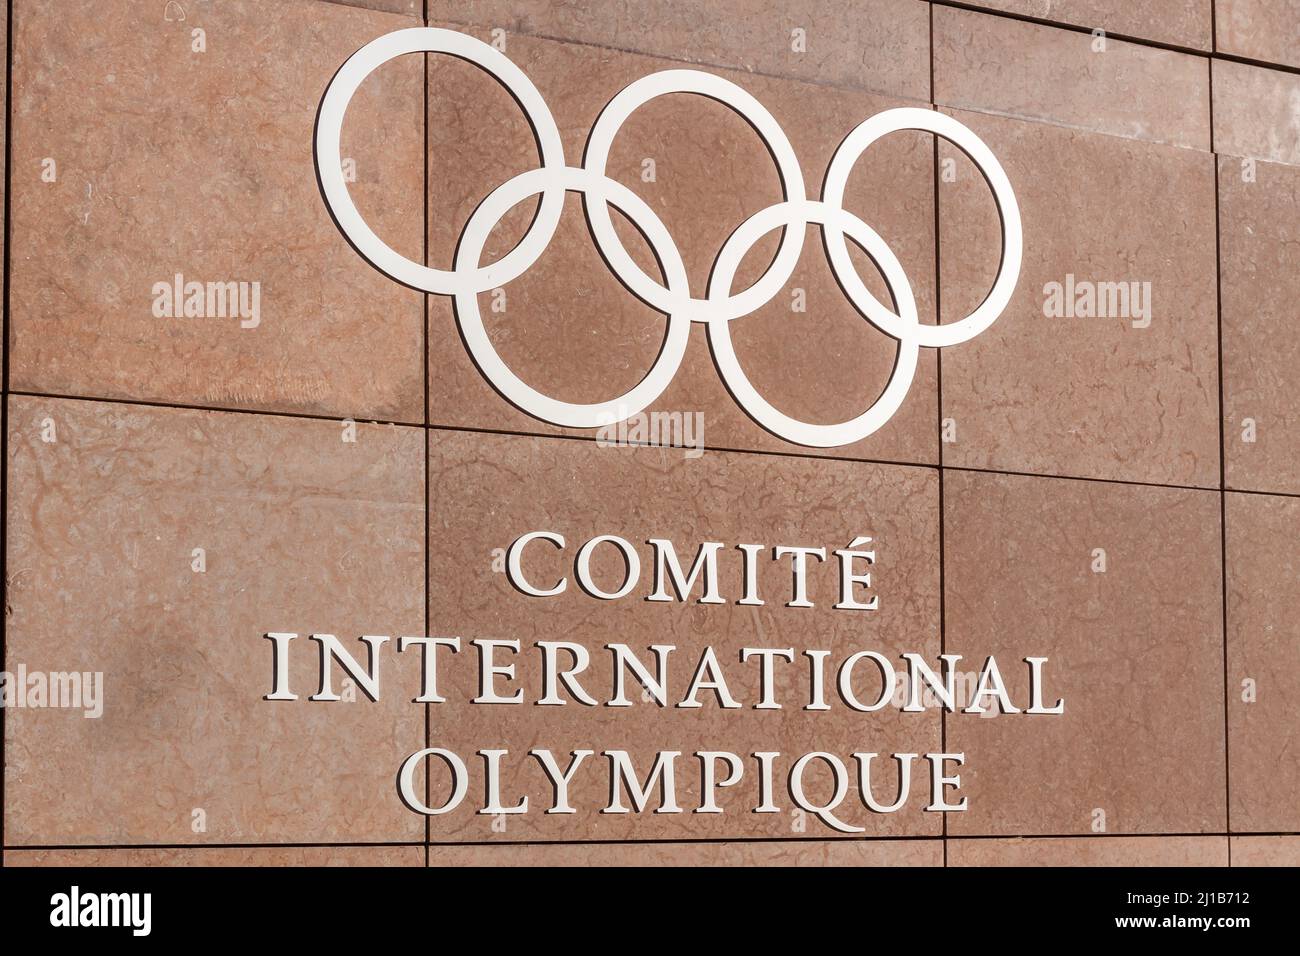 HEADQUARTERS OF THE INTERNATIONAL OLYMPIC COMMITTEE IN LAUSANNE, OLYMPIC RINGS, LOGO OF THE IOC, SPORT, OLYMPICSM, LAUSANNE, CANTON OF VAUD, SWITZERLAND Stock Photo